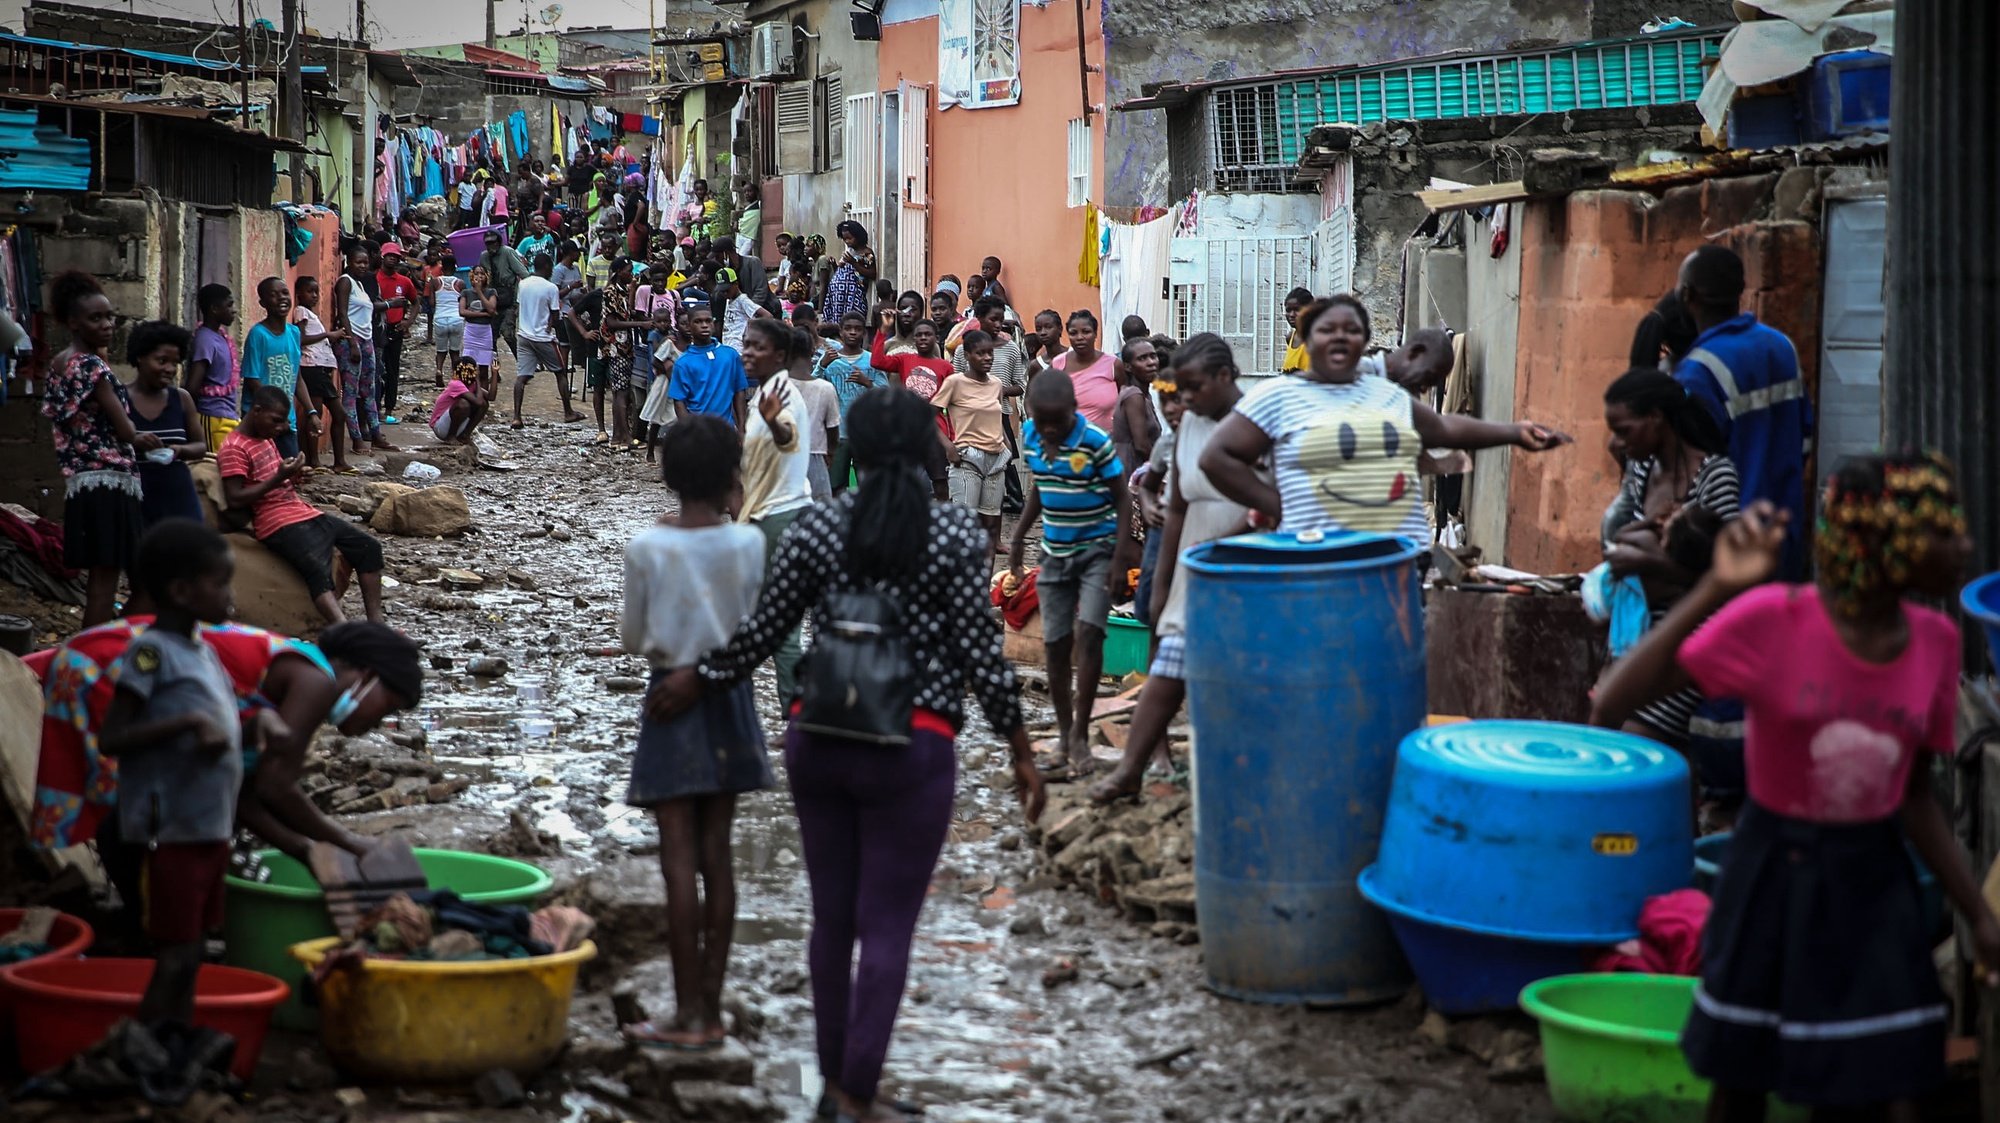 People on a muddy street after heavy rain that fell Monday night in Encide neighborhood, in the Sambizanga district, on the outskirts of Luanda, Angola, 20 April 2021. The torrential rains that hit Luanda on Monday killed 14 people and left 8,000 homeless, with 16 houses collapsed, 15 trees fell, and a bridge was destroyed, among other damages yet to be calculated. AMPE ROGERIO/LUSA